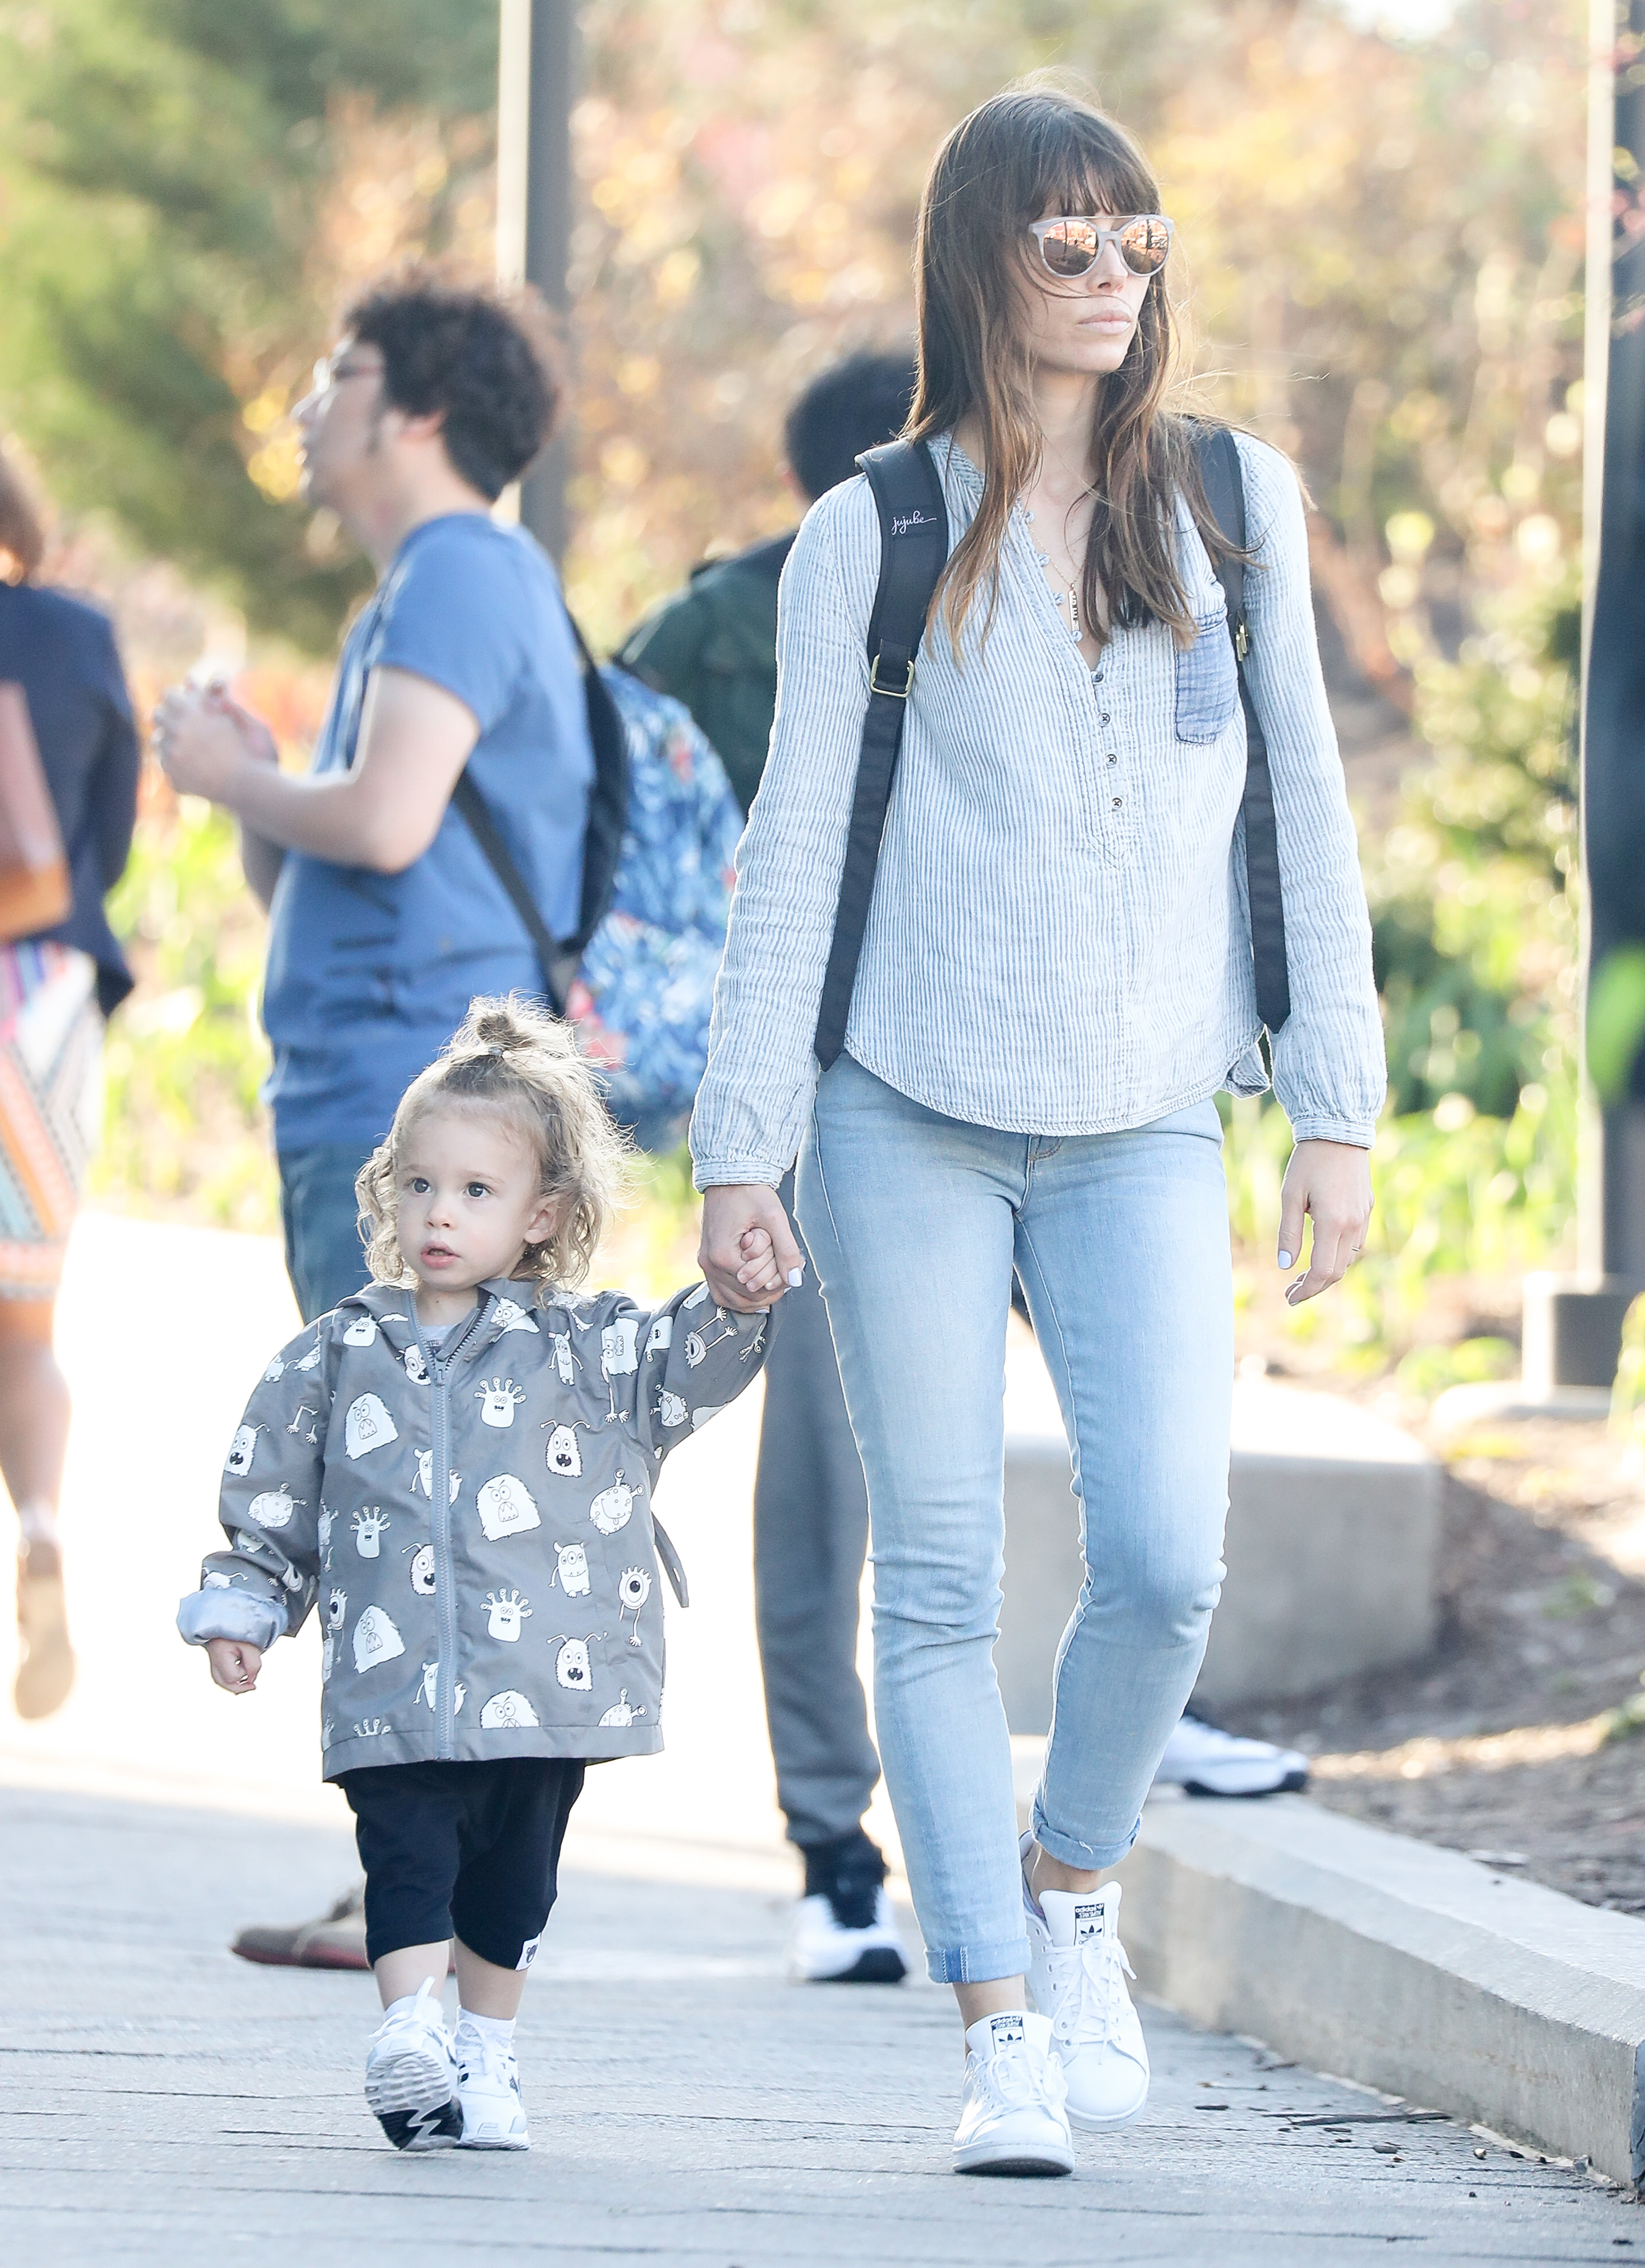 Jessica Biel walks hand in hand with adorable son Silas